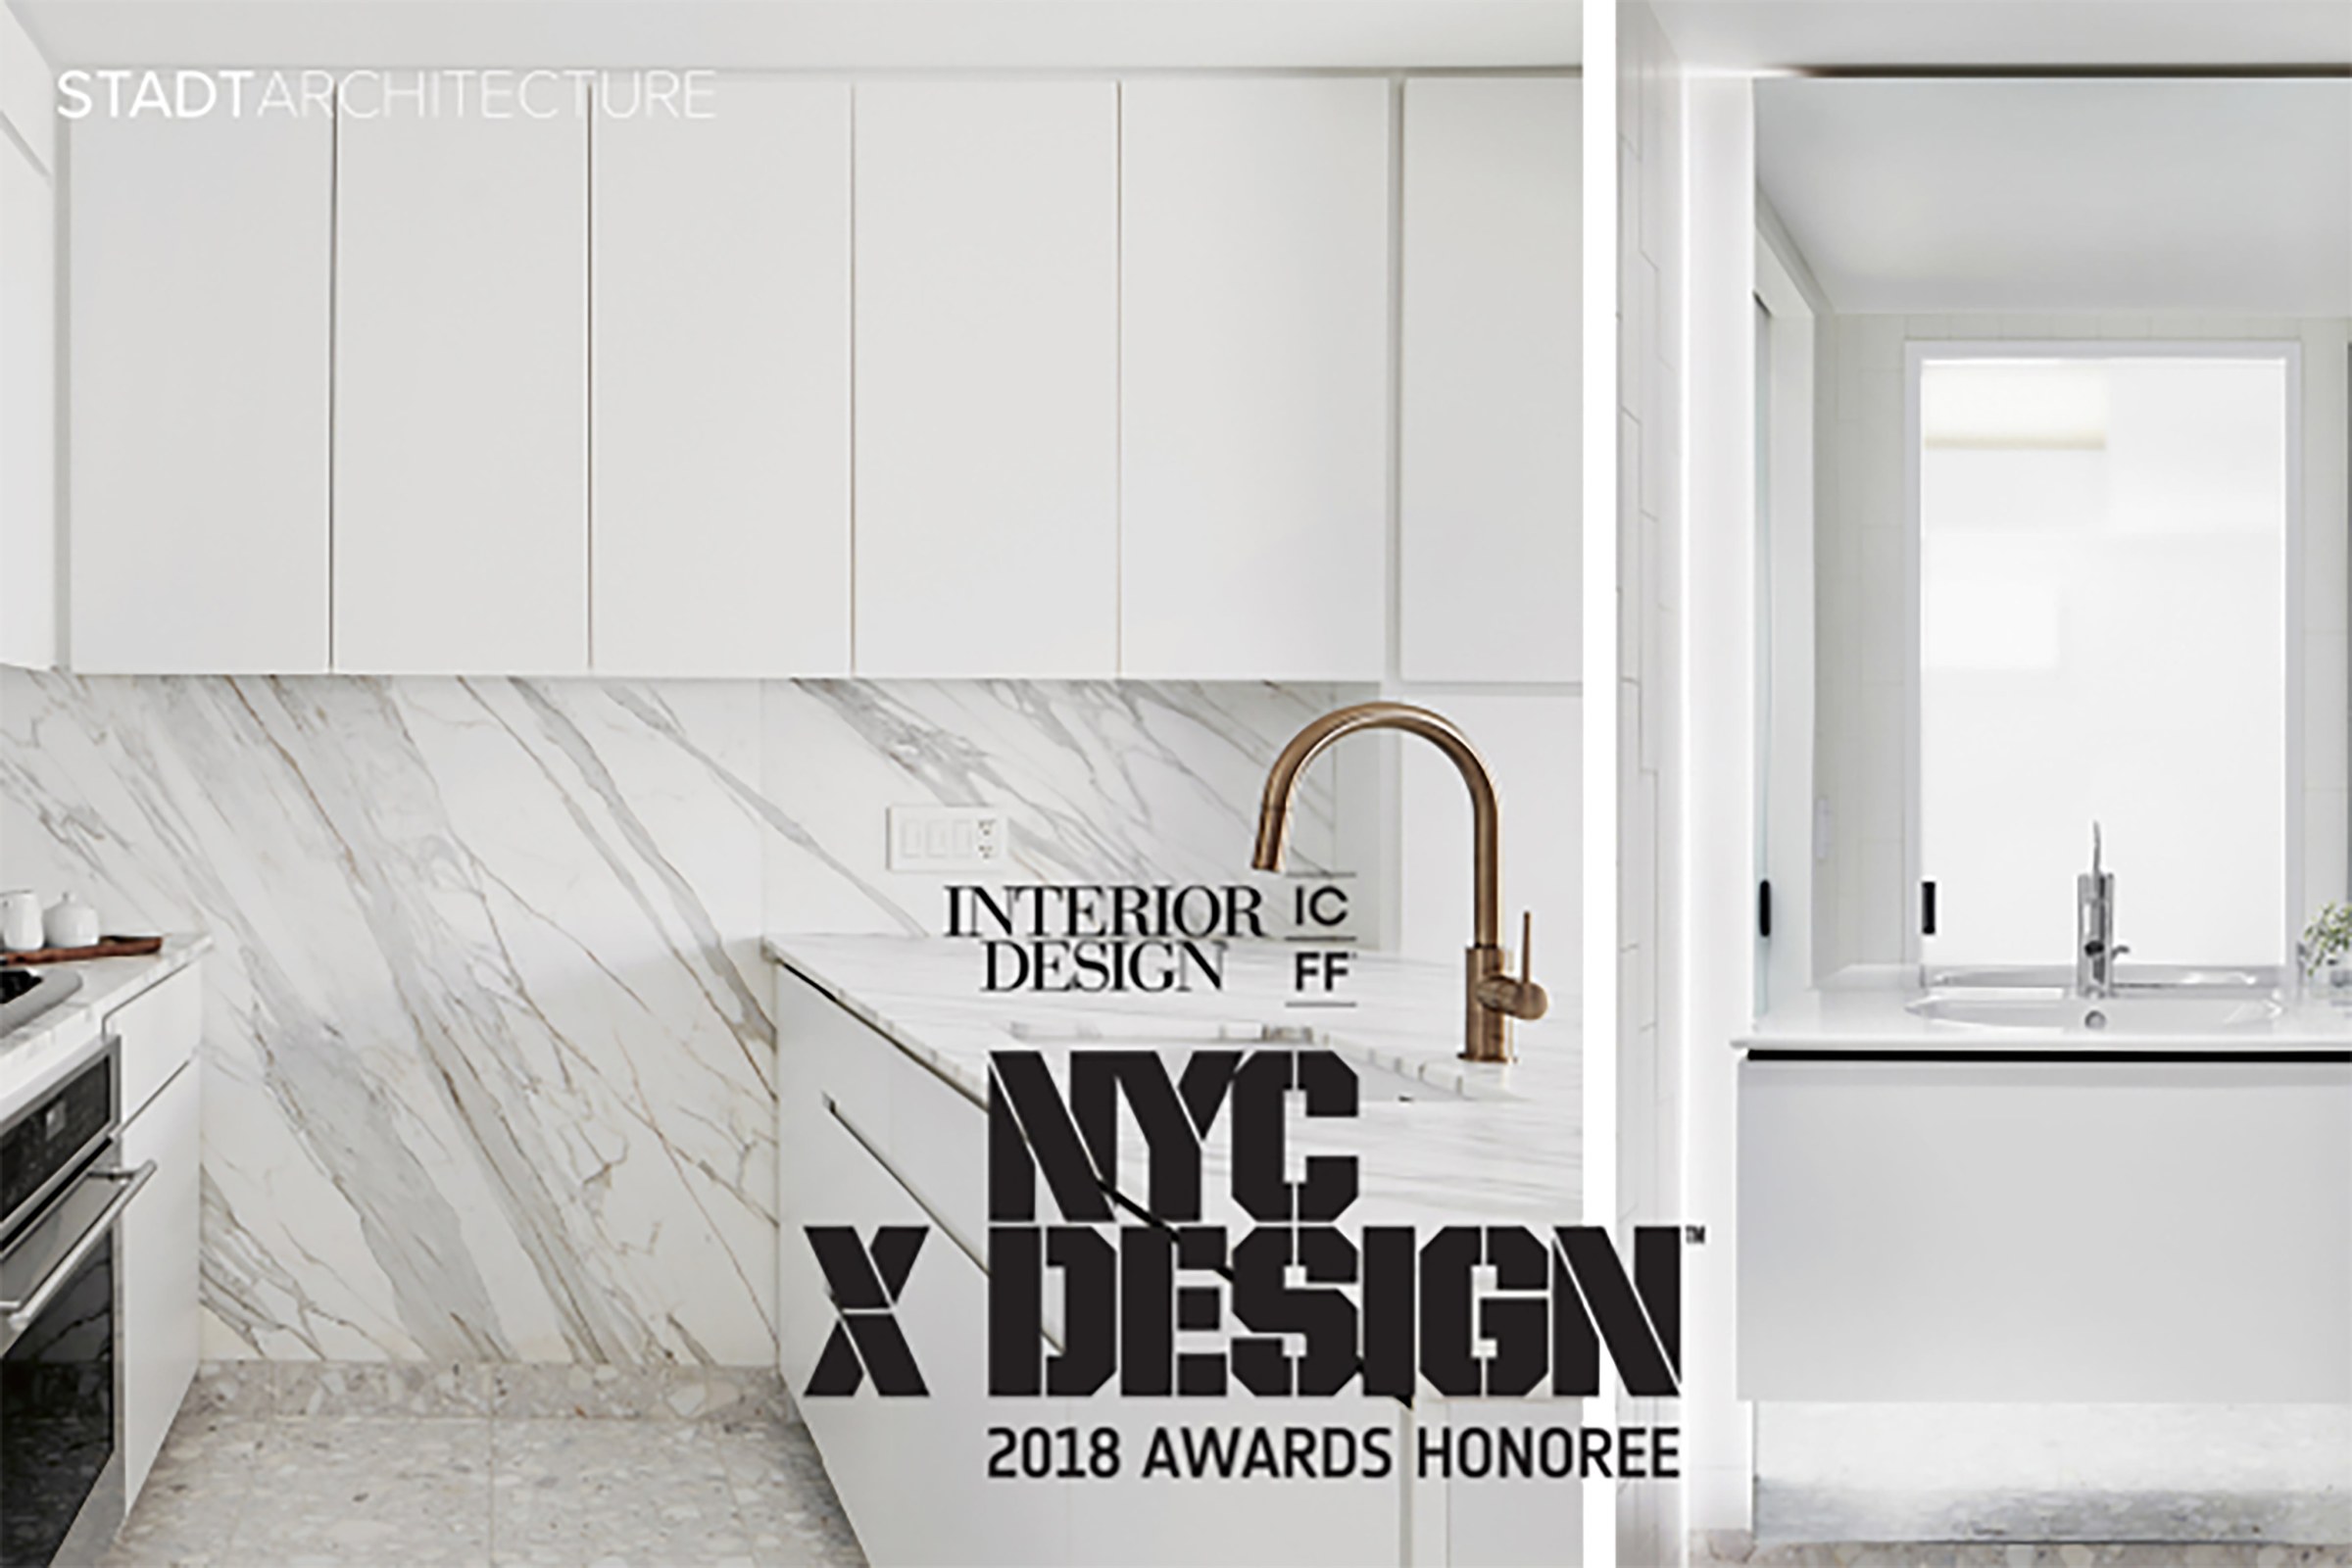 White marble kitchen with NYC x Design in black text 